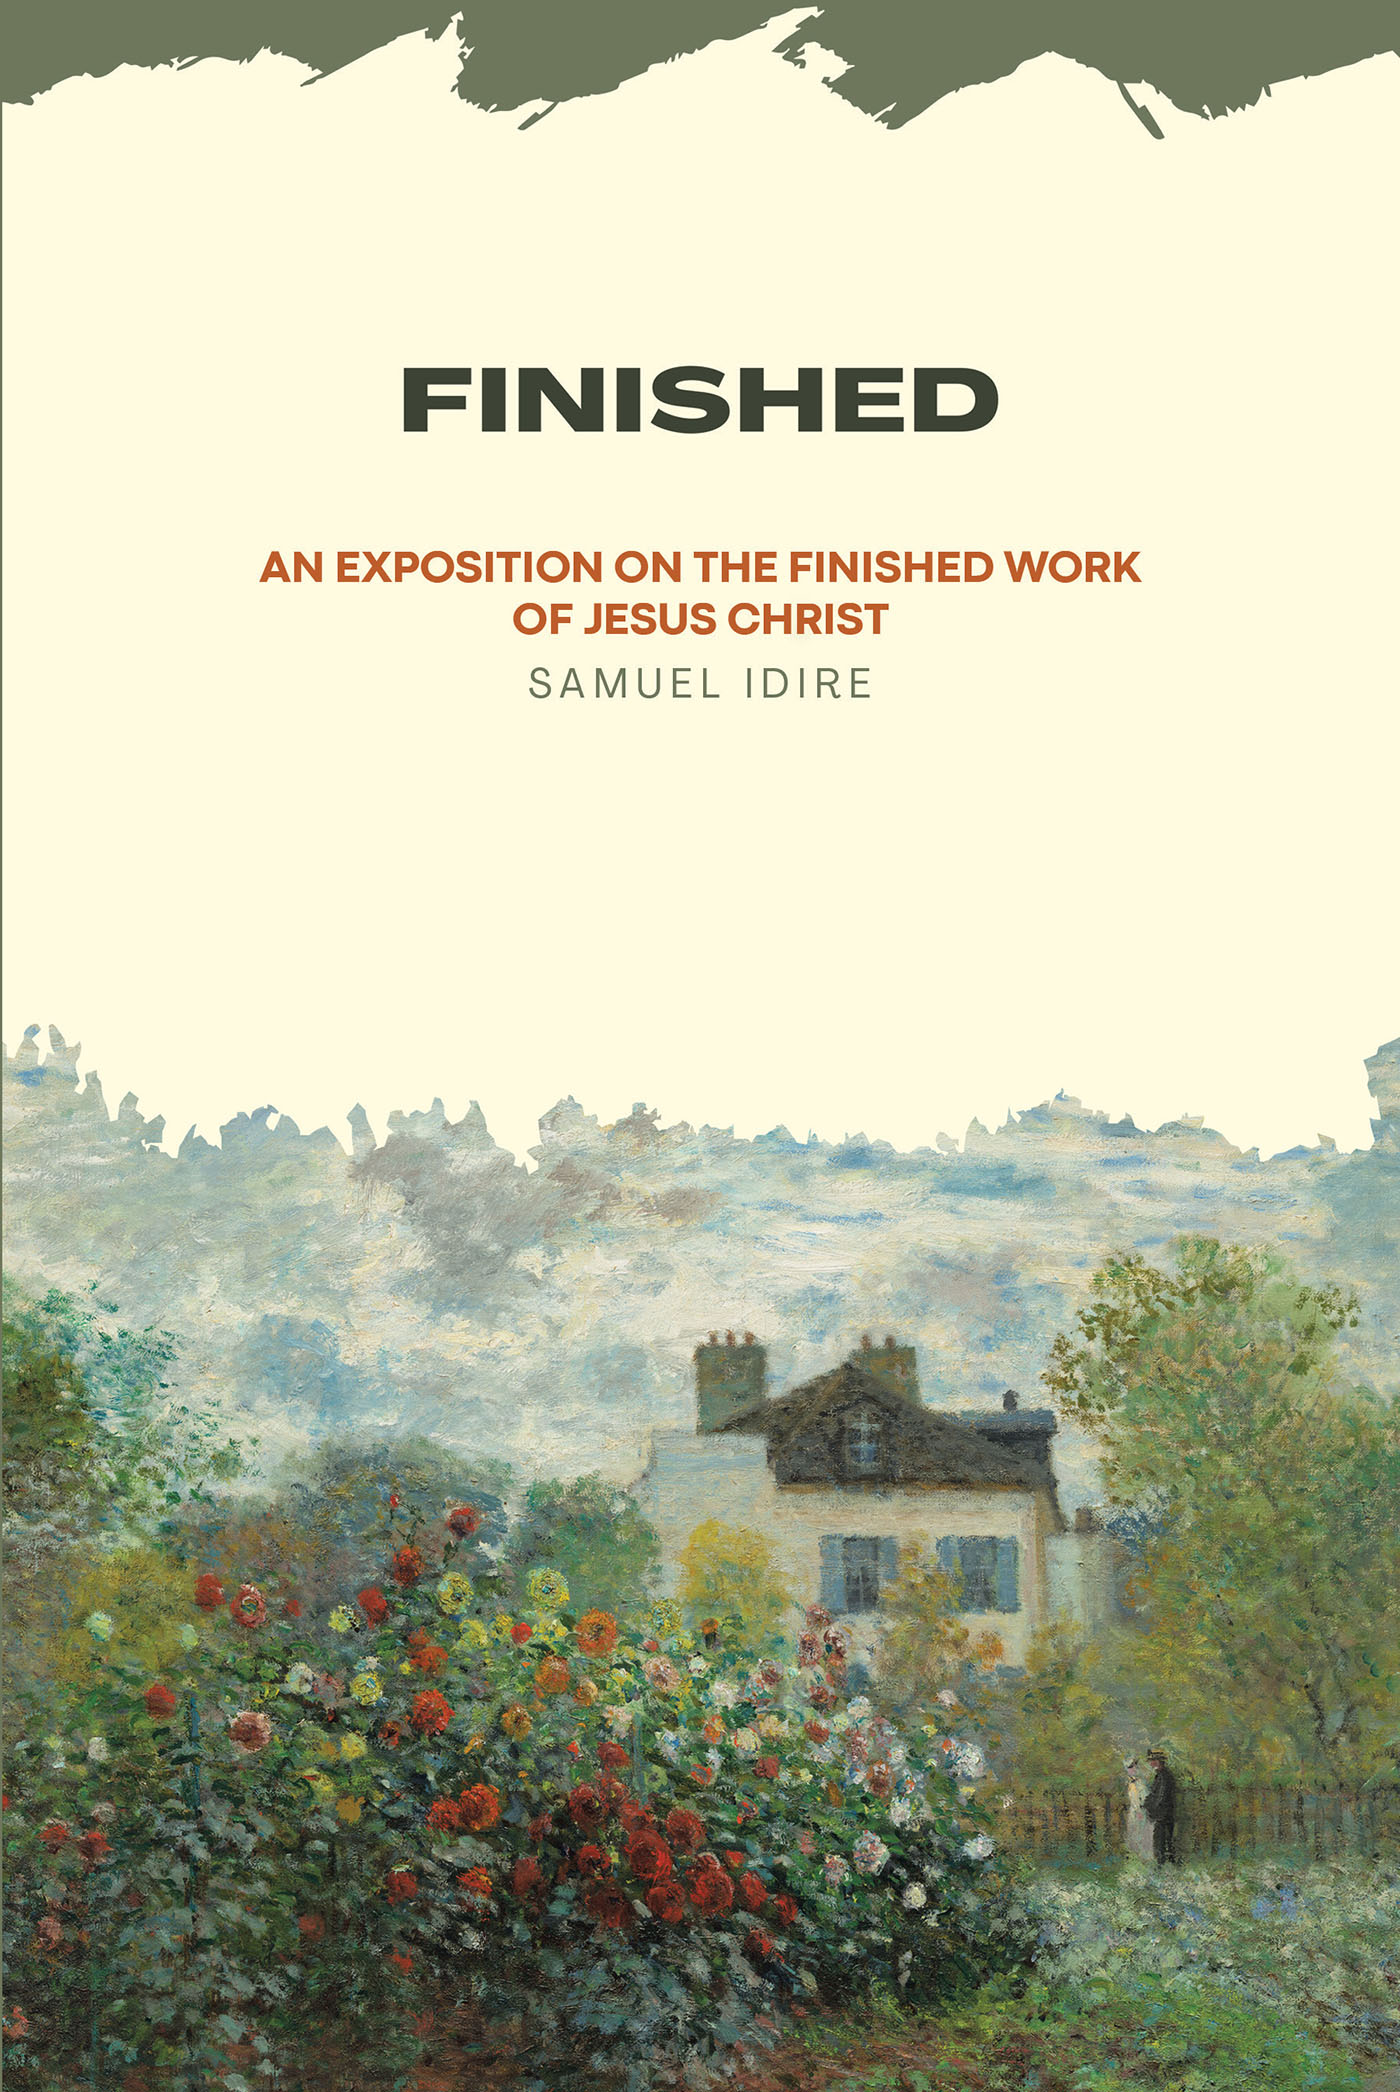 Samuel Idire’s Newly Released "Finished: An Exposition on the Finished Work of Jesus Christ" is an Inspiring and Educational Resource for Christians